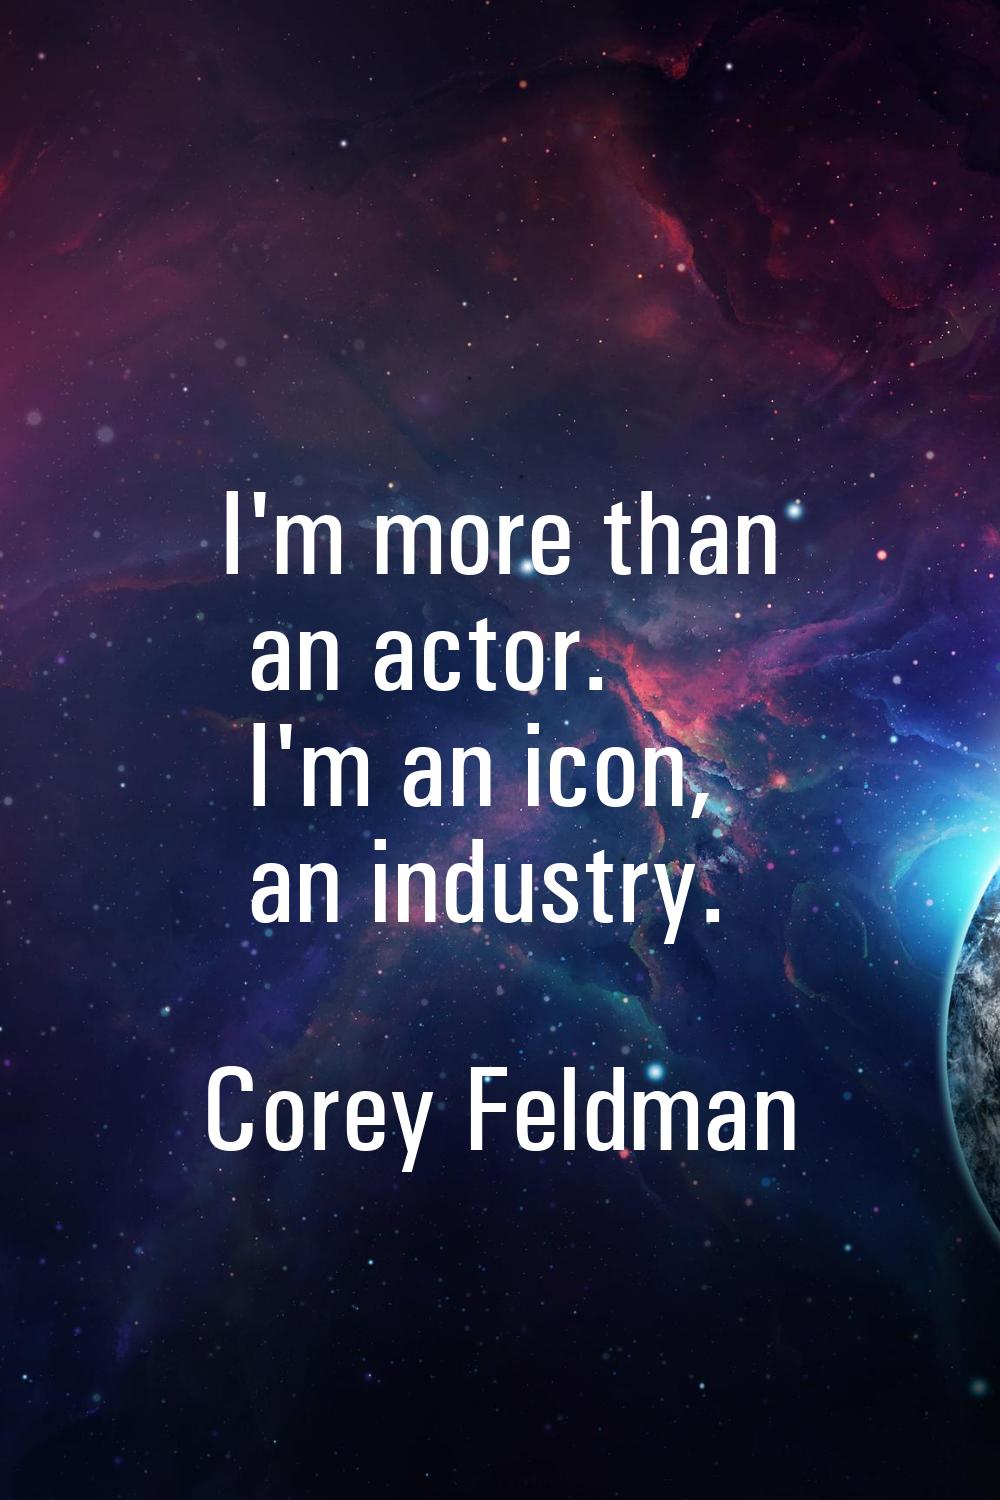 I'm more than an actor. I'm an icon, an industry.